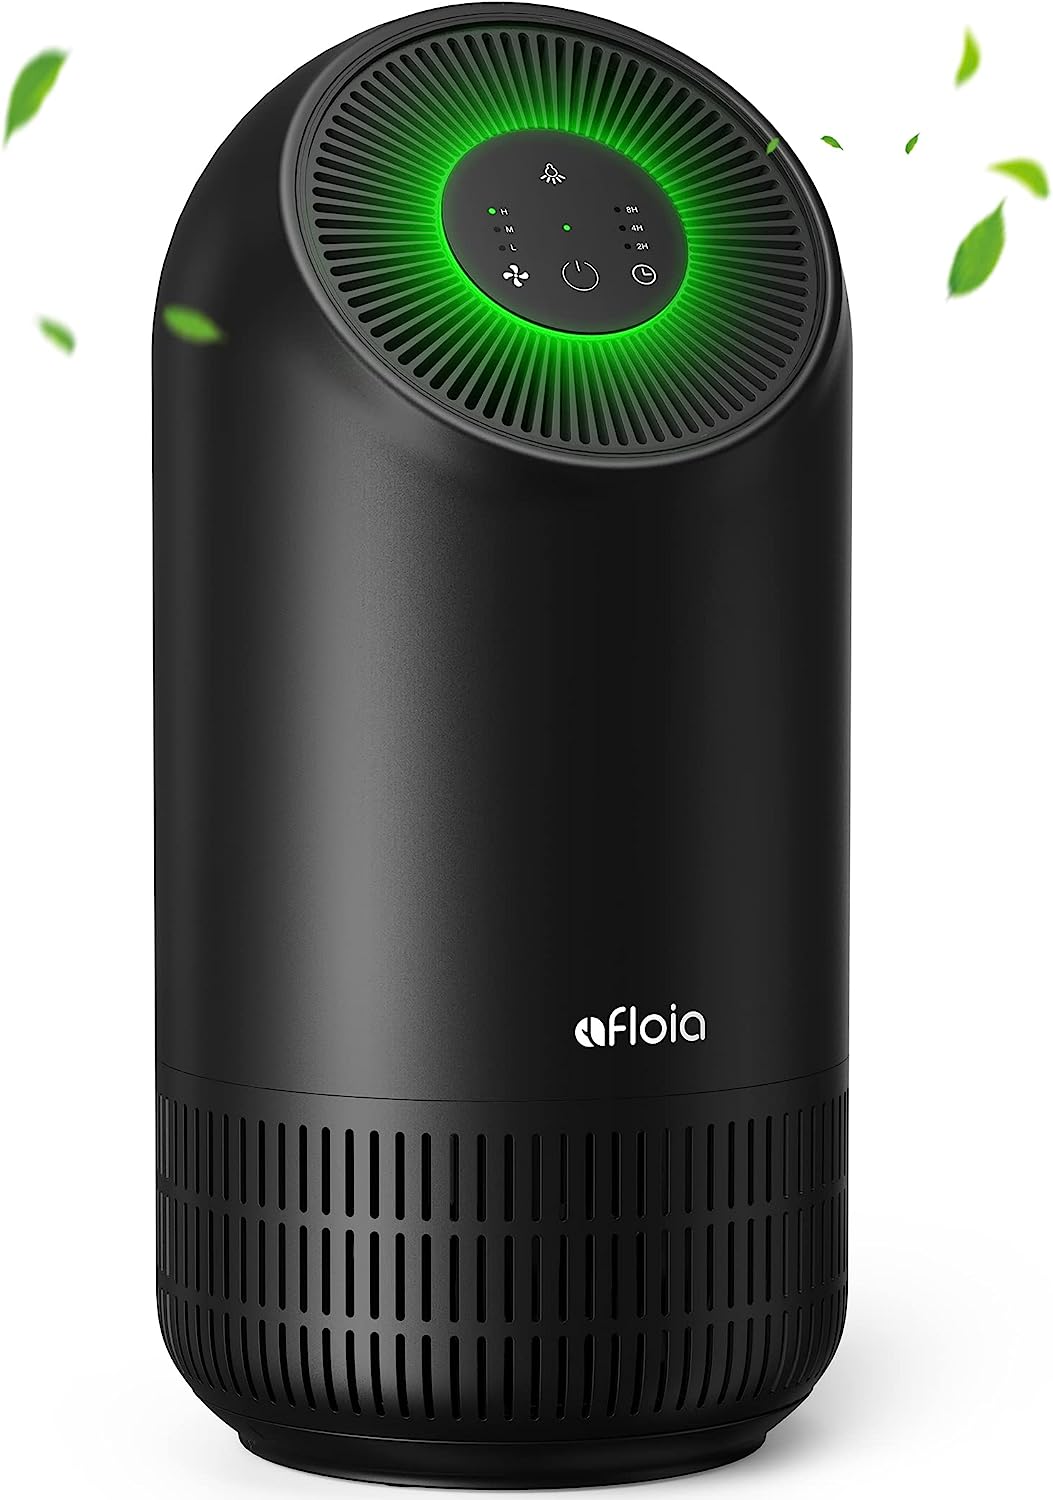 Afloia HEPA Air Purifier for Pets, Air Purifiers for [...]